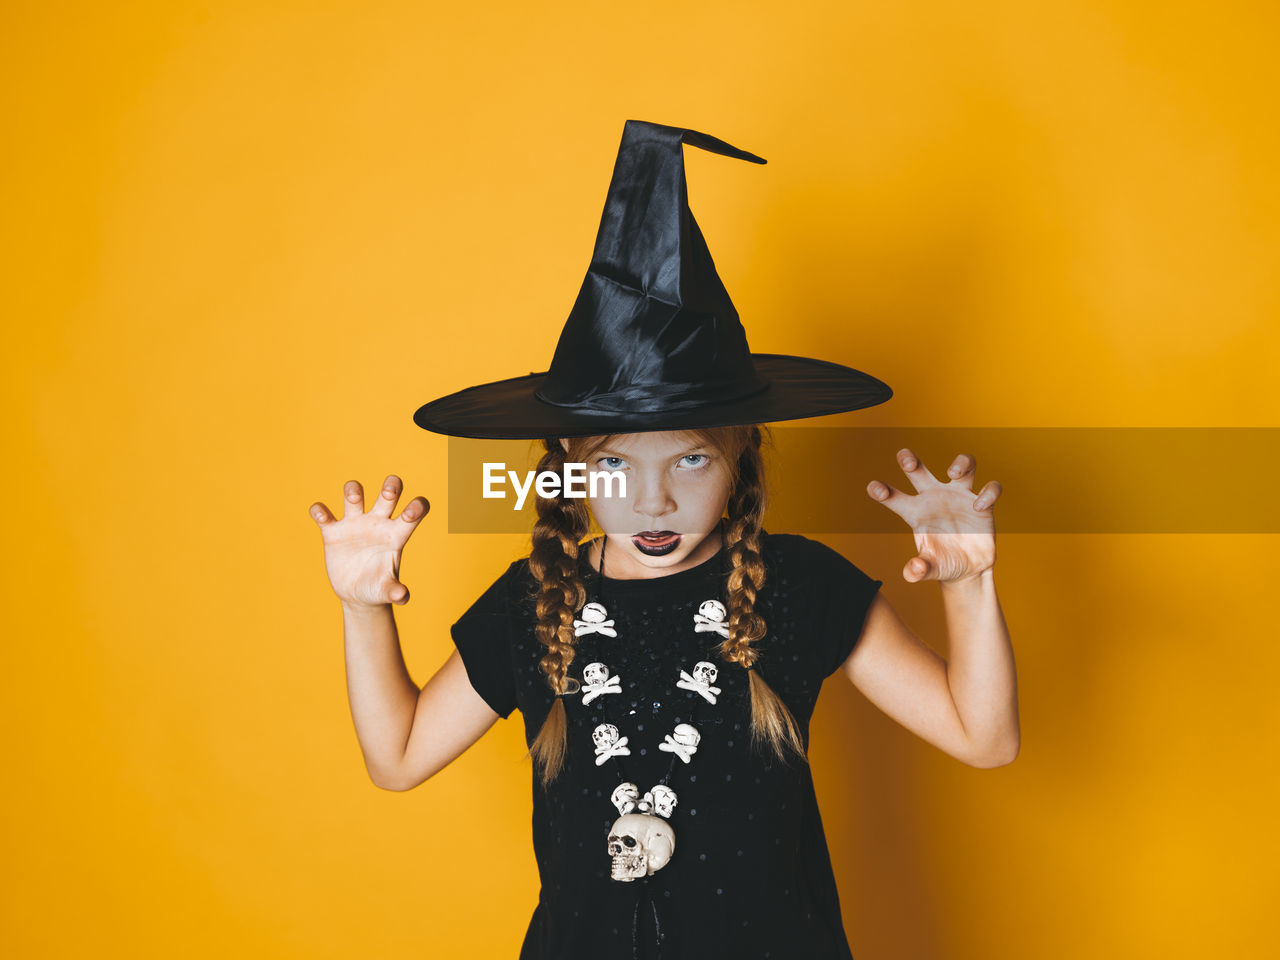 Portrait of girl wearing witch hat gesturing against yellow background during halloween